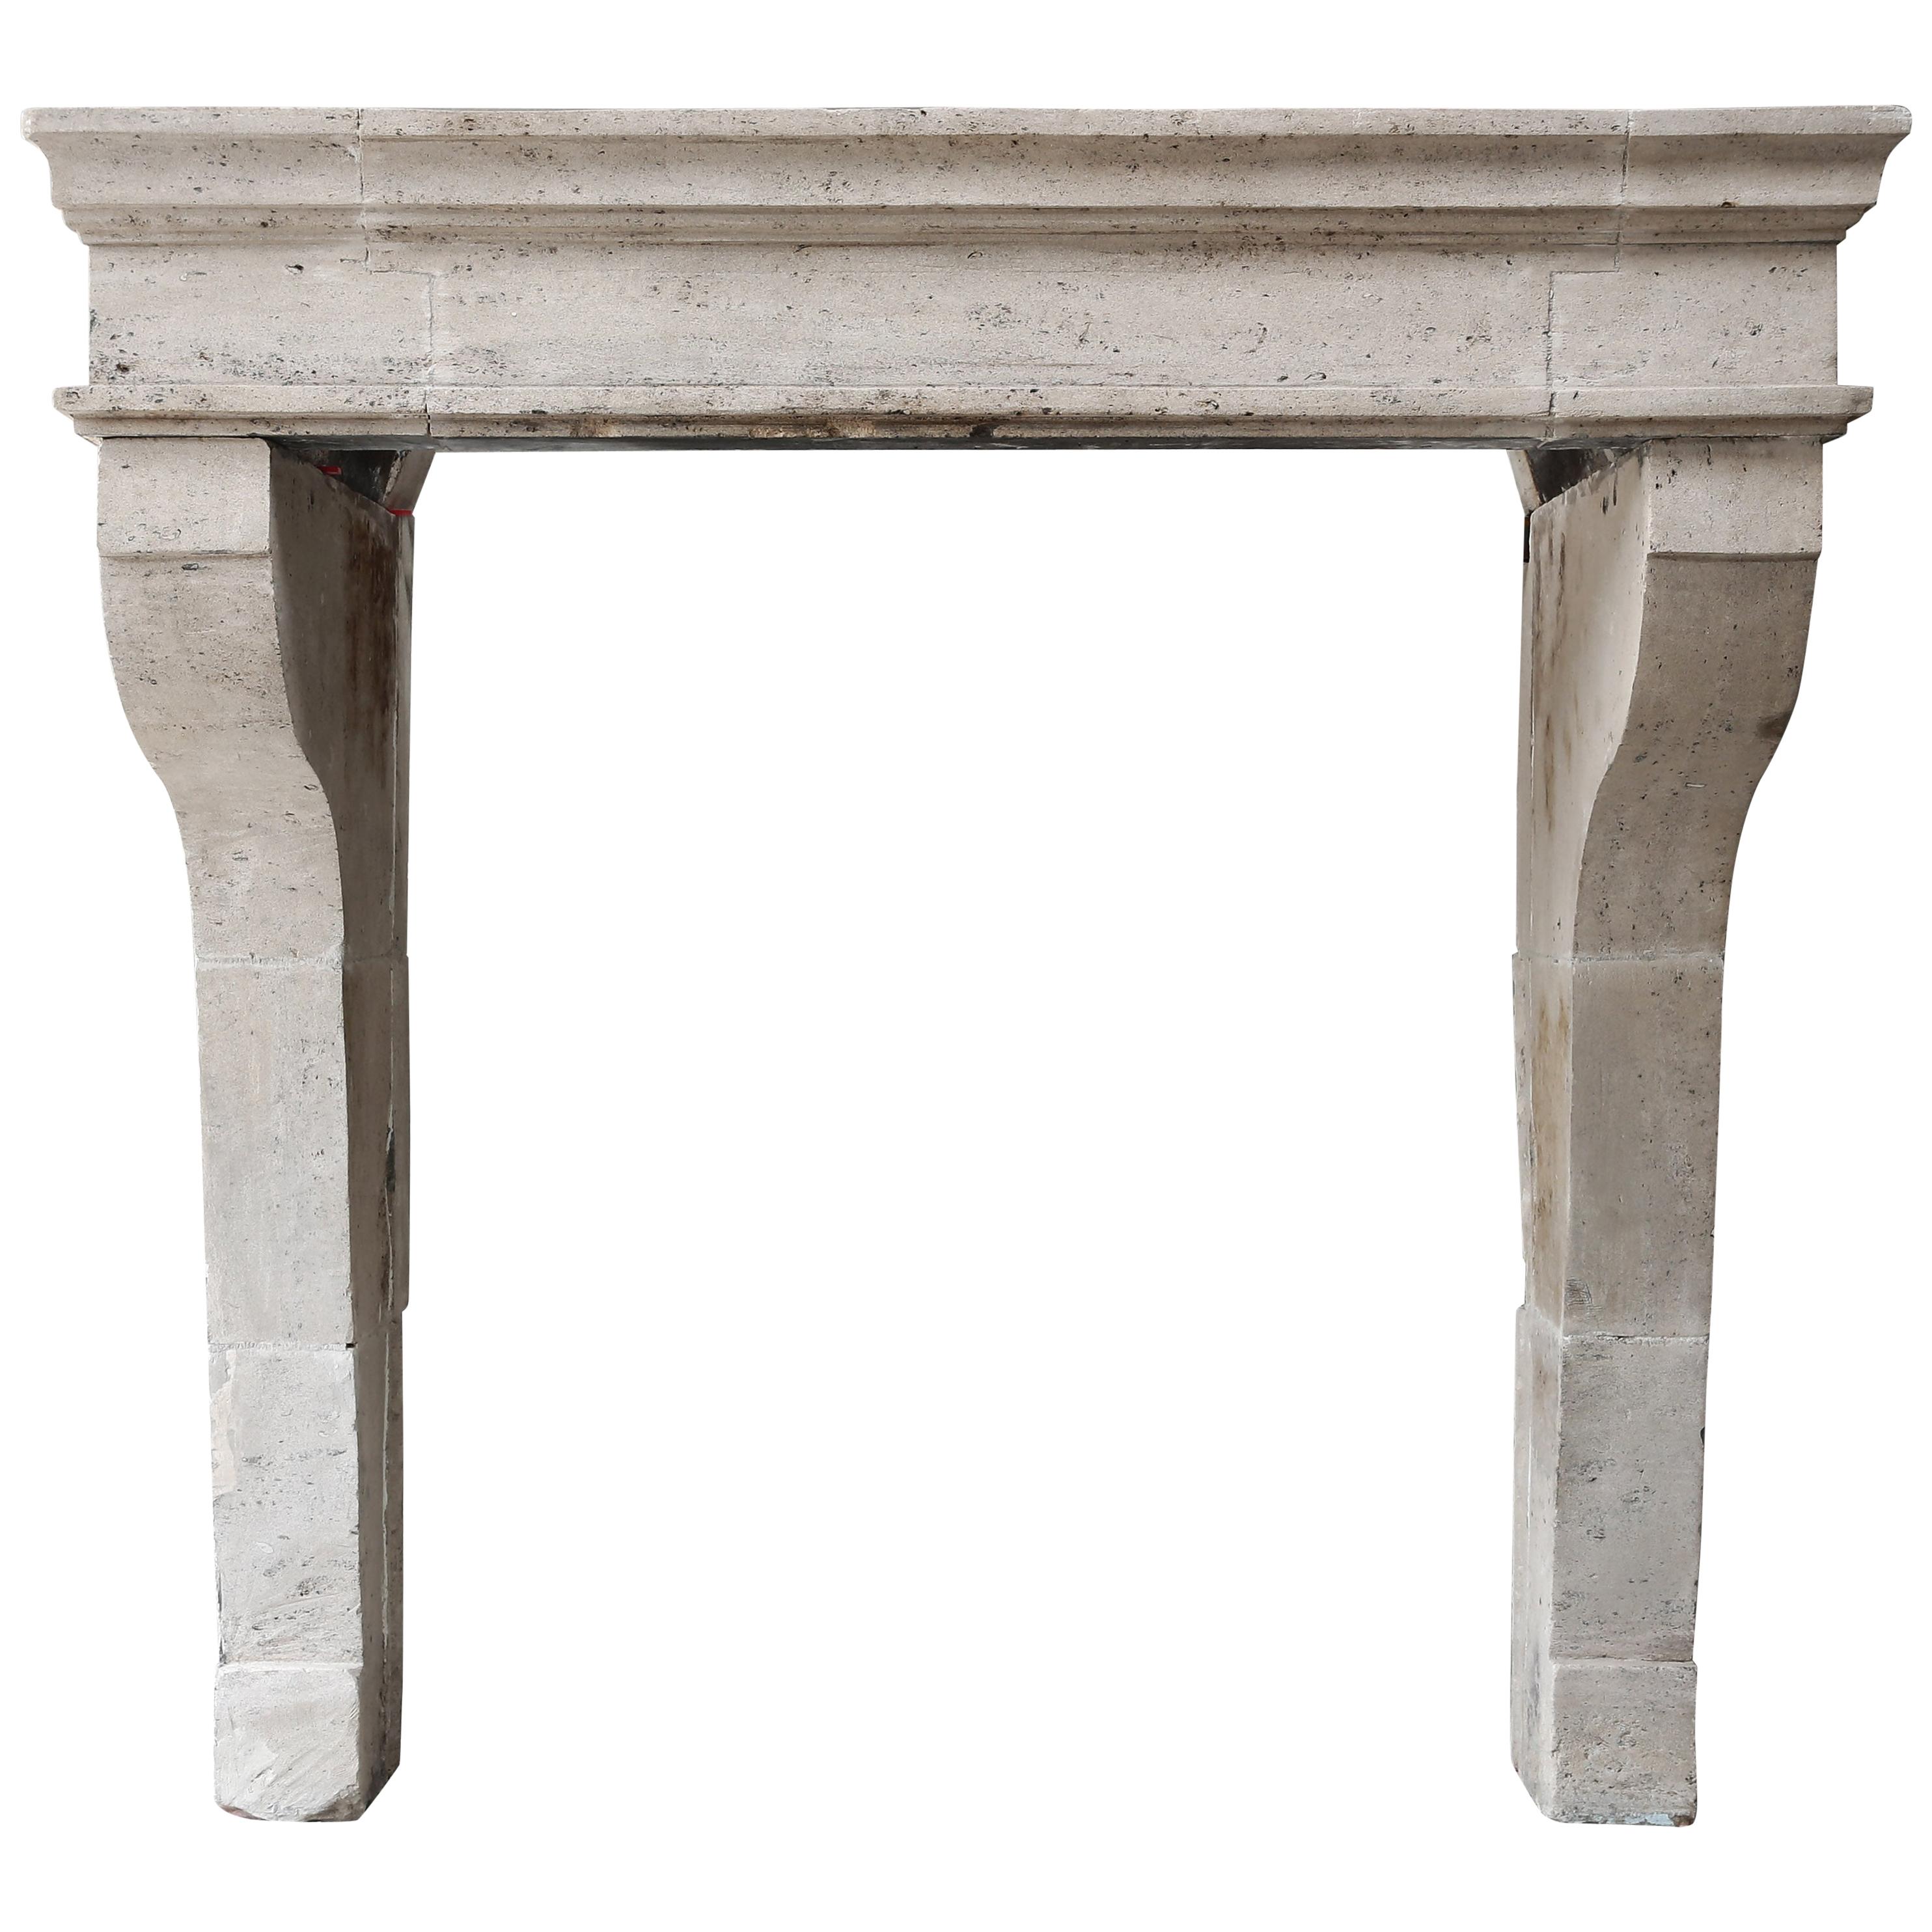 Antique Fireplace of French Limestone, Campagnarde Style from Bourgogne